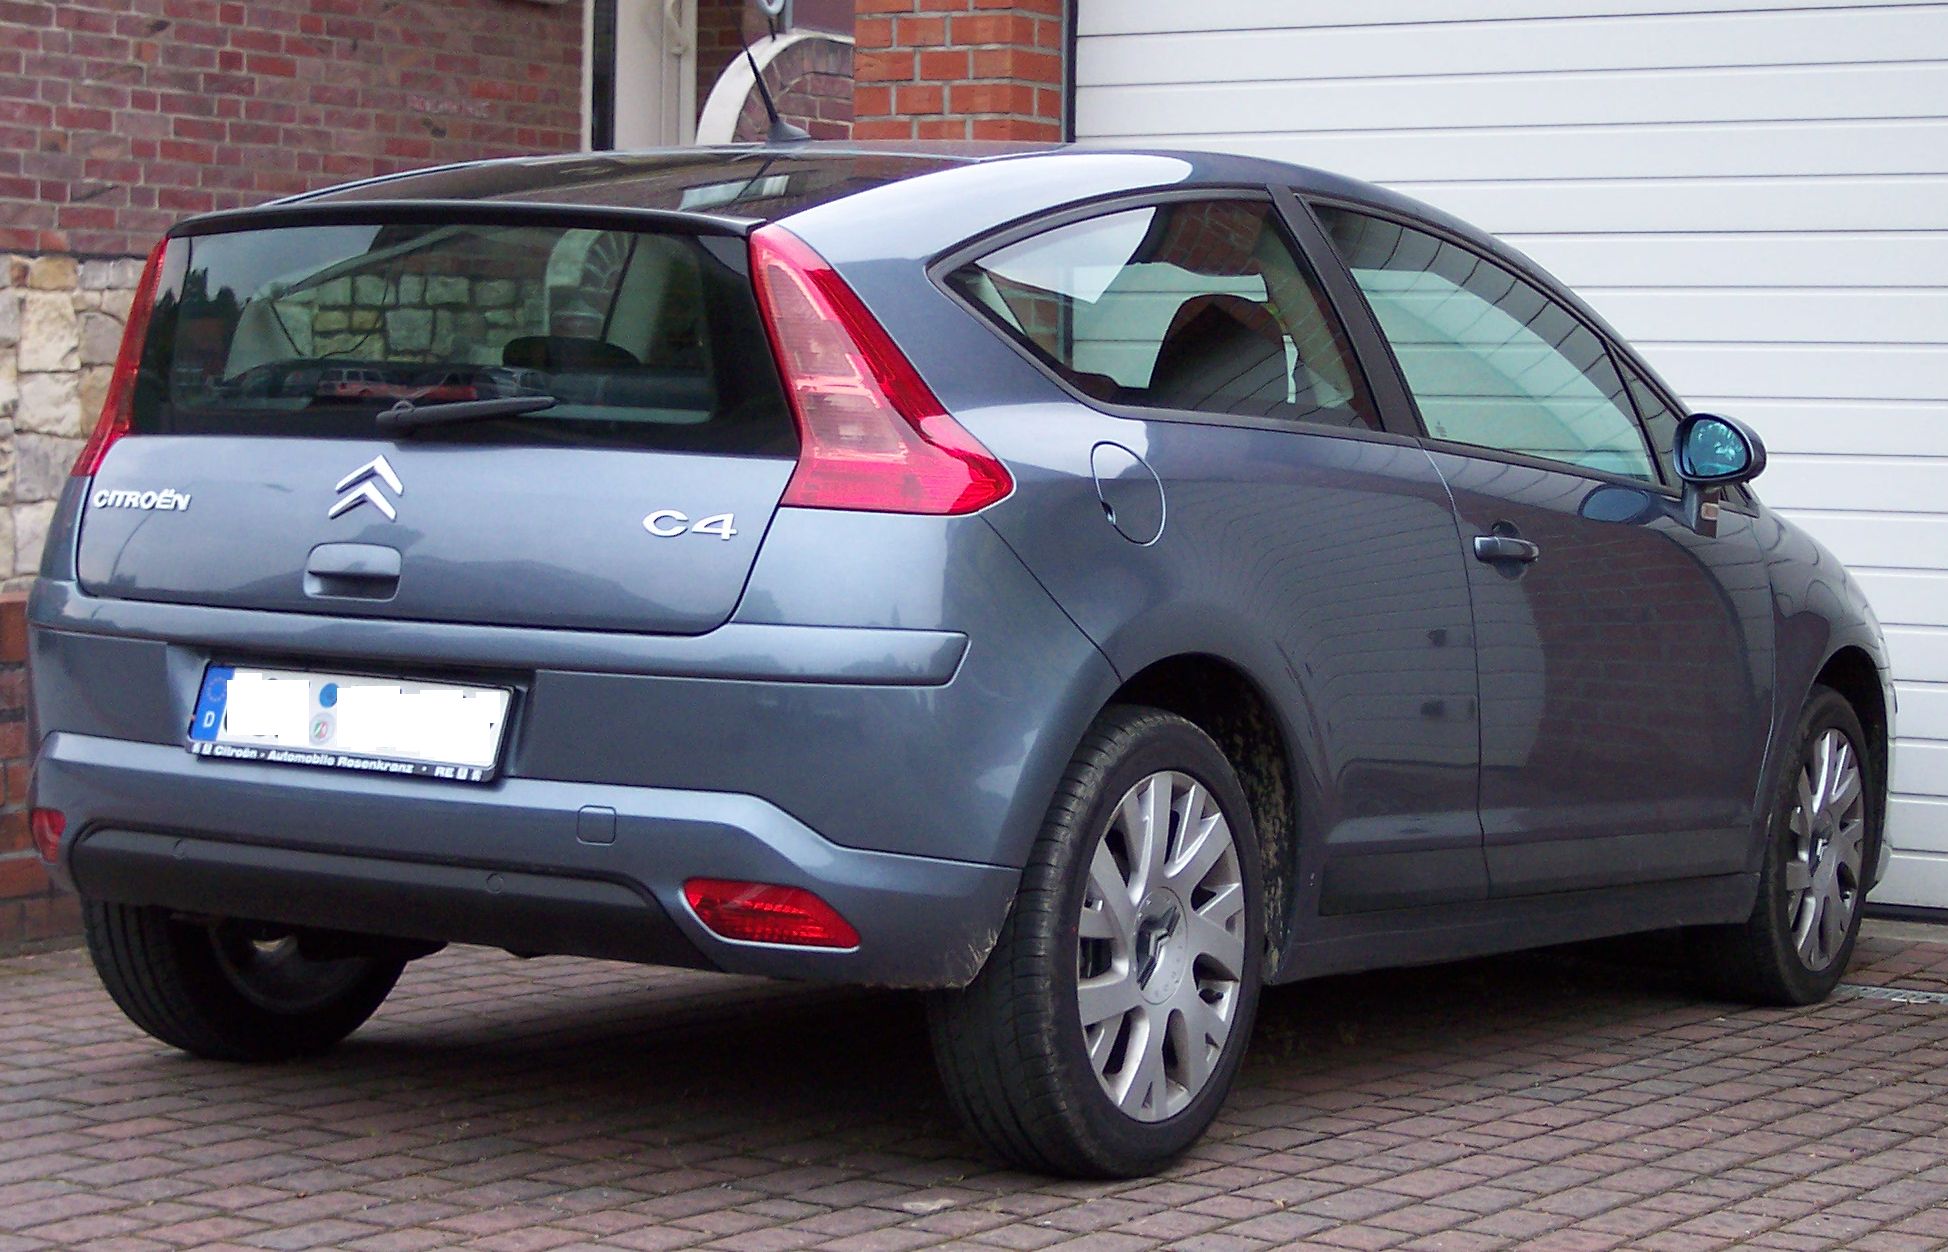 File:Citroën Grand C4 Picasso Exclusive front.jpg - Wikimedia Commons